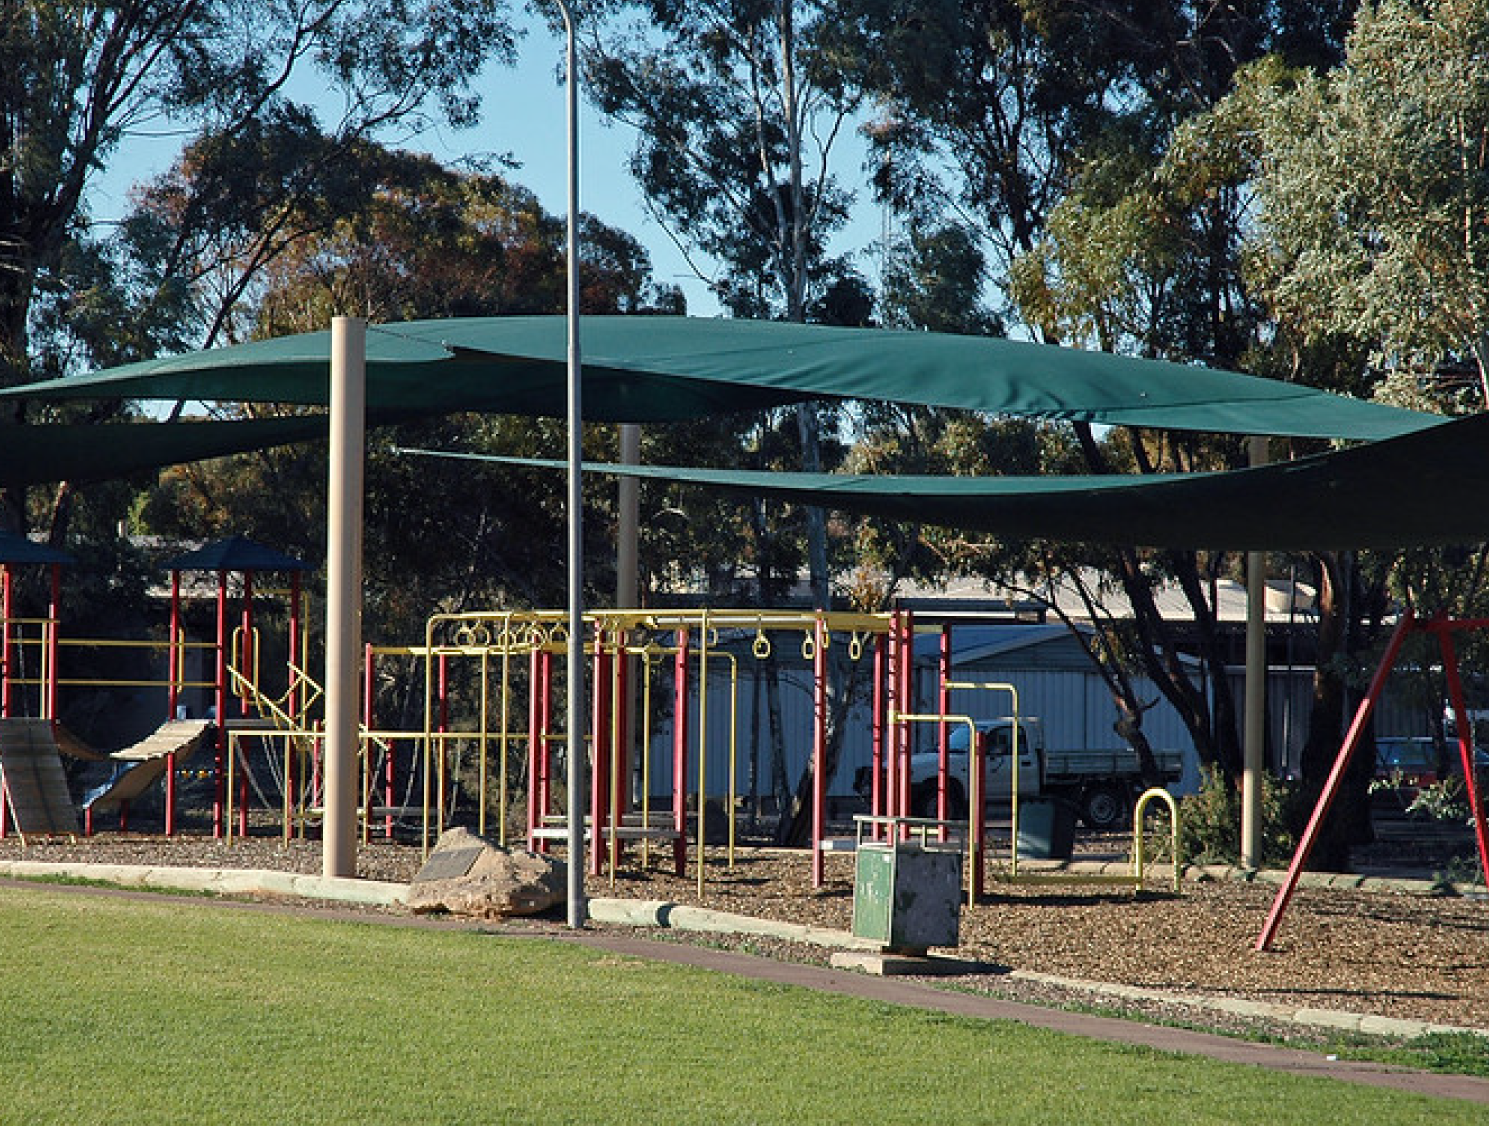 Play structure at school shaded by shade sails overhead